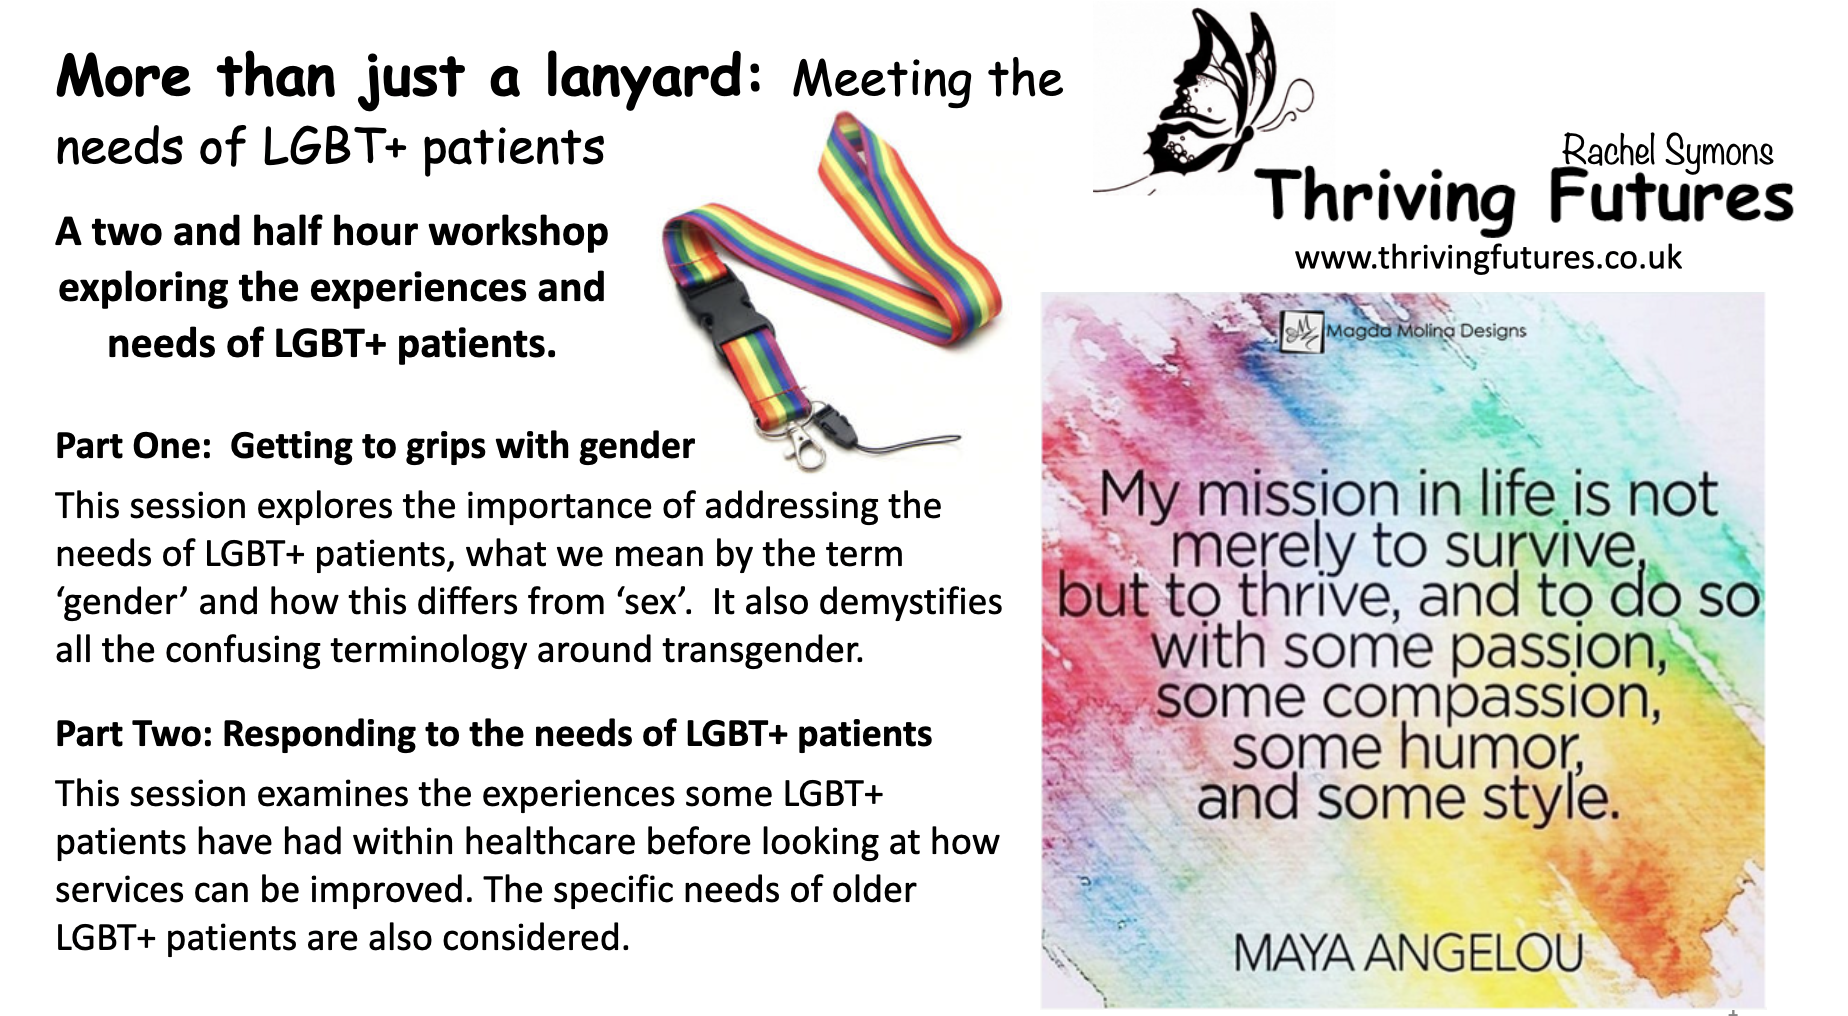 More than just a lanyard: Meeting the needs of LGBT+ patients featured image